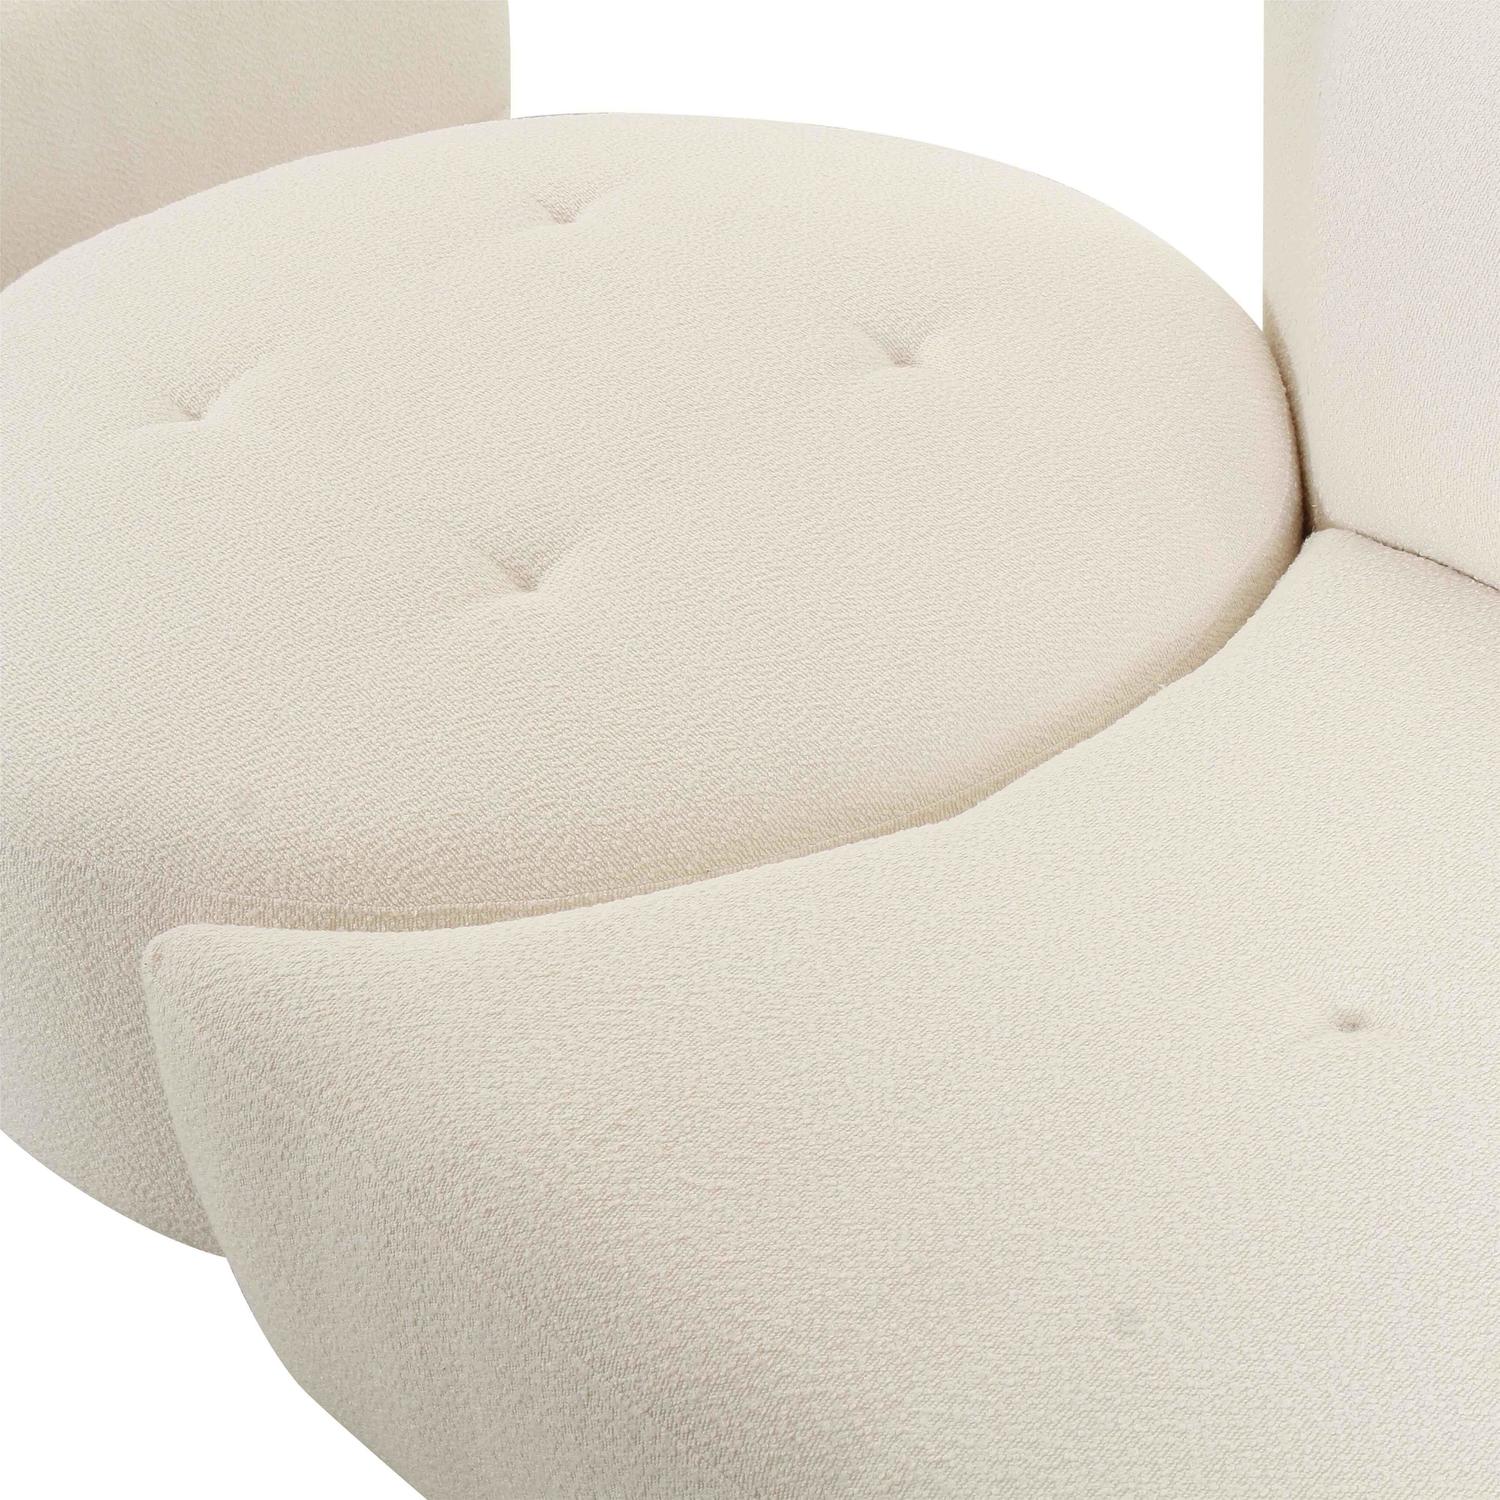 leather couch with ottoman Contemporary Design Furniture Sectionals Cream